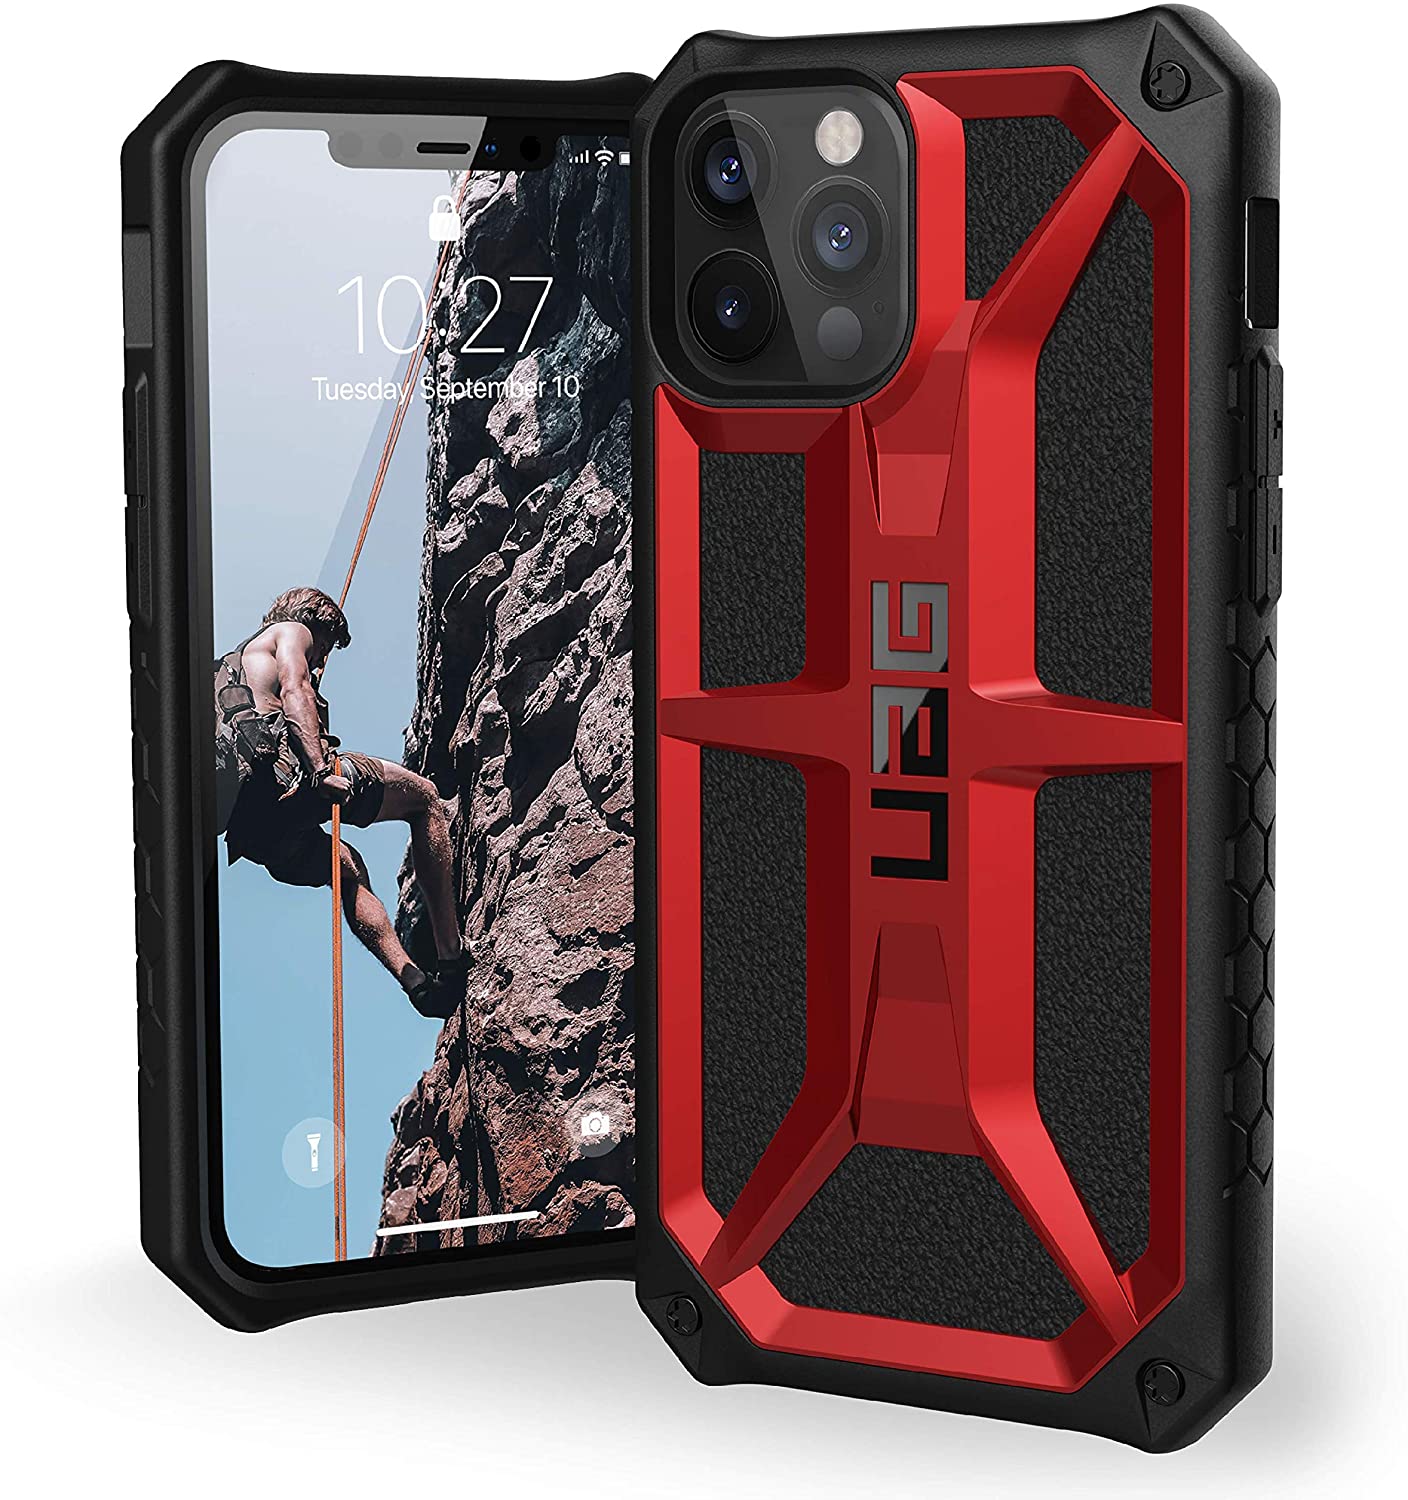 Hyun Red Tyre Pattern Design Heavy Duty Tough Armor Extreme Protection Case With Kickstand Shock Absorbing Detachable 2 in 1 Case Cover For Motorola Moto C Plus MRSTER Moto C Plus Case